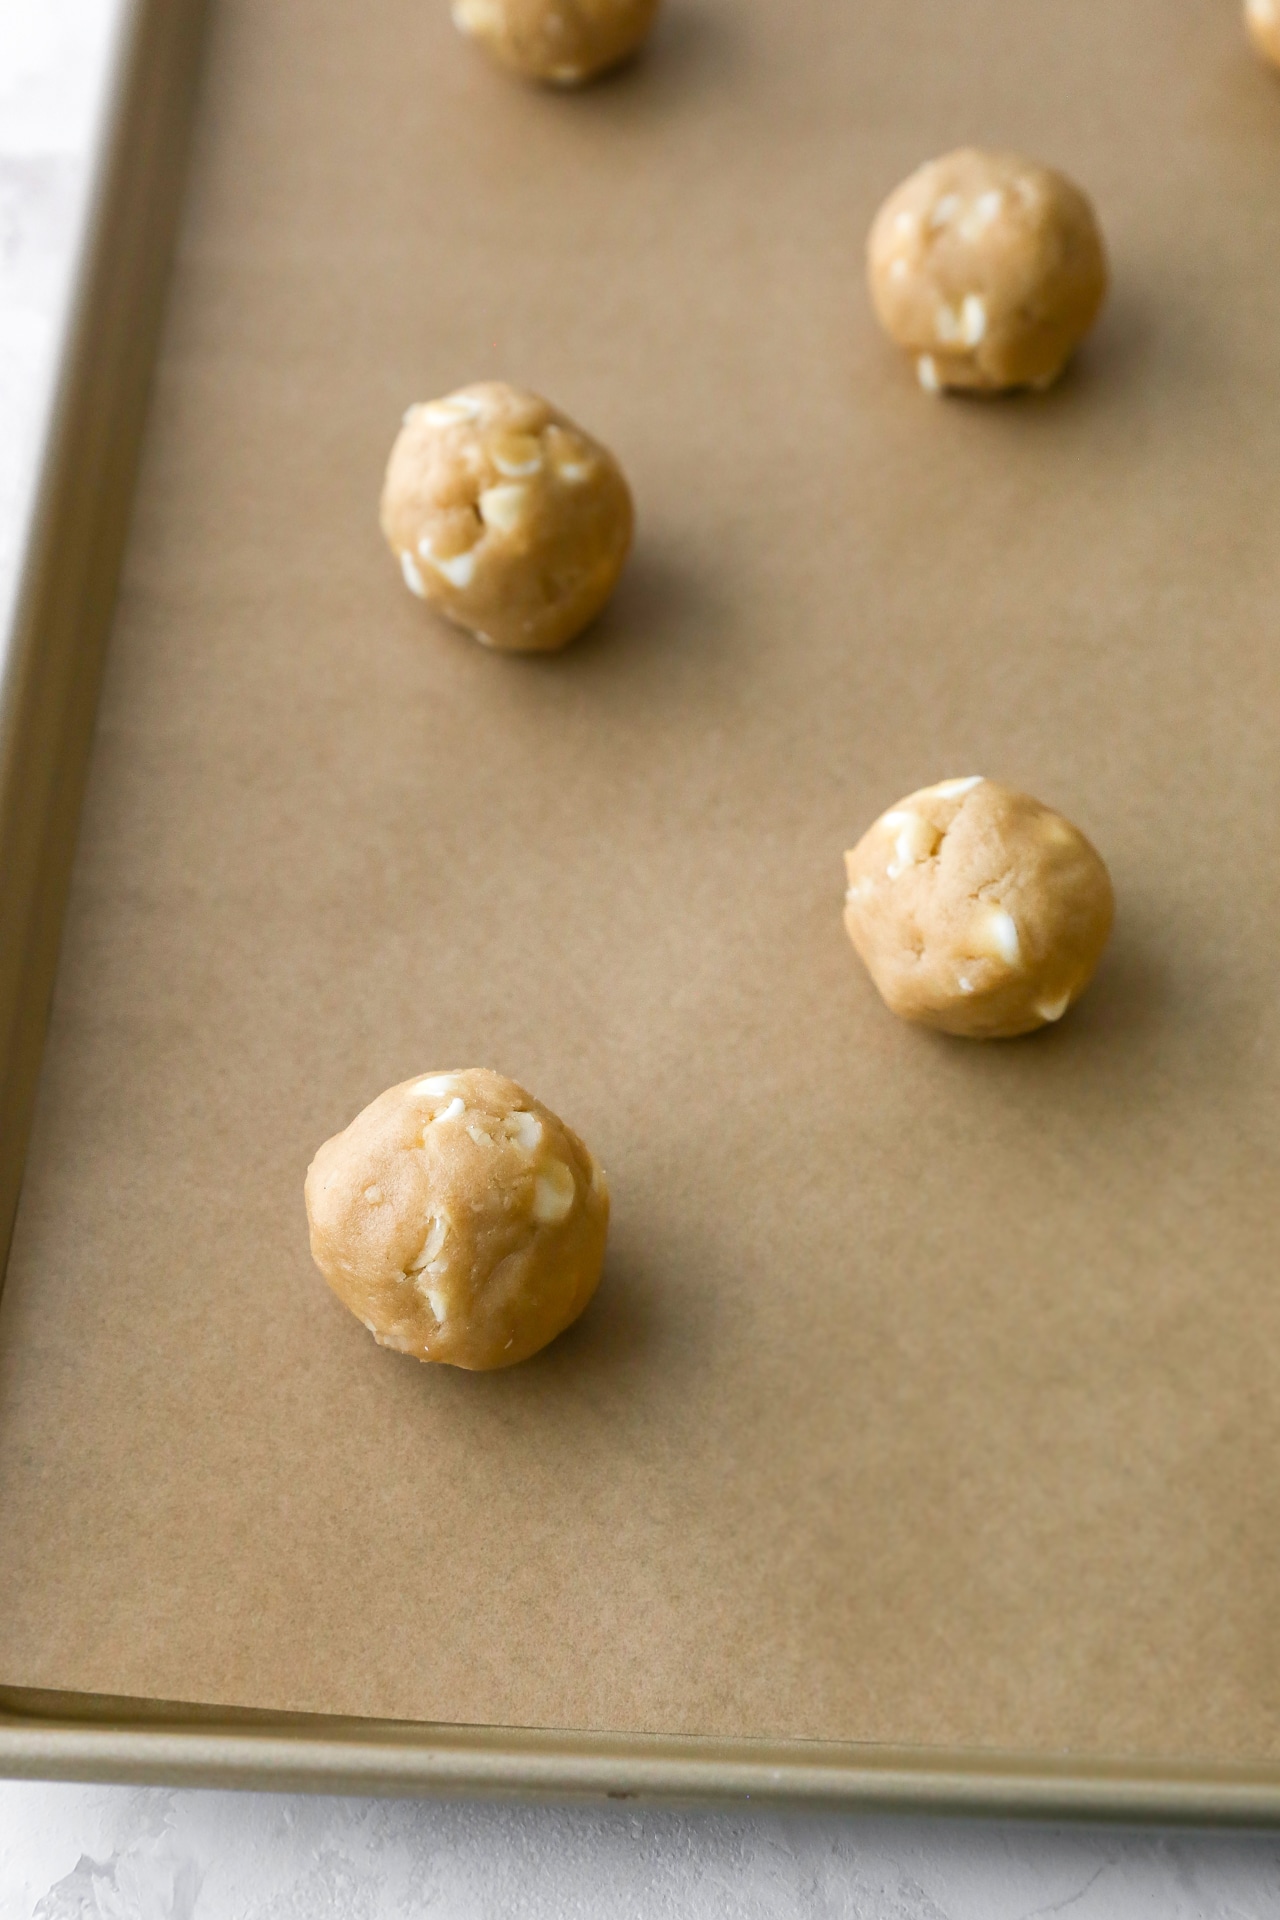 Cookie dough formed into balls on a cookie sheet.